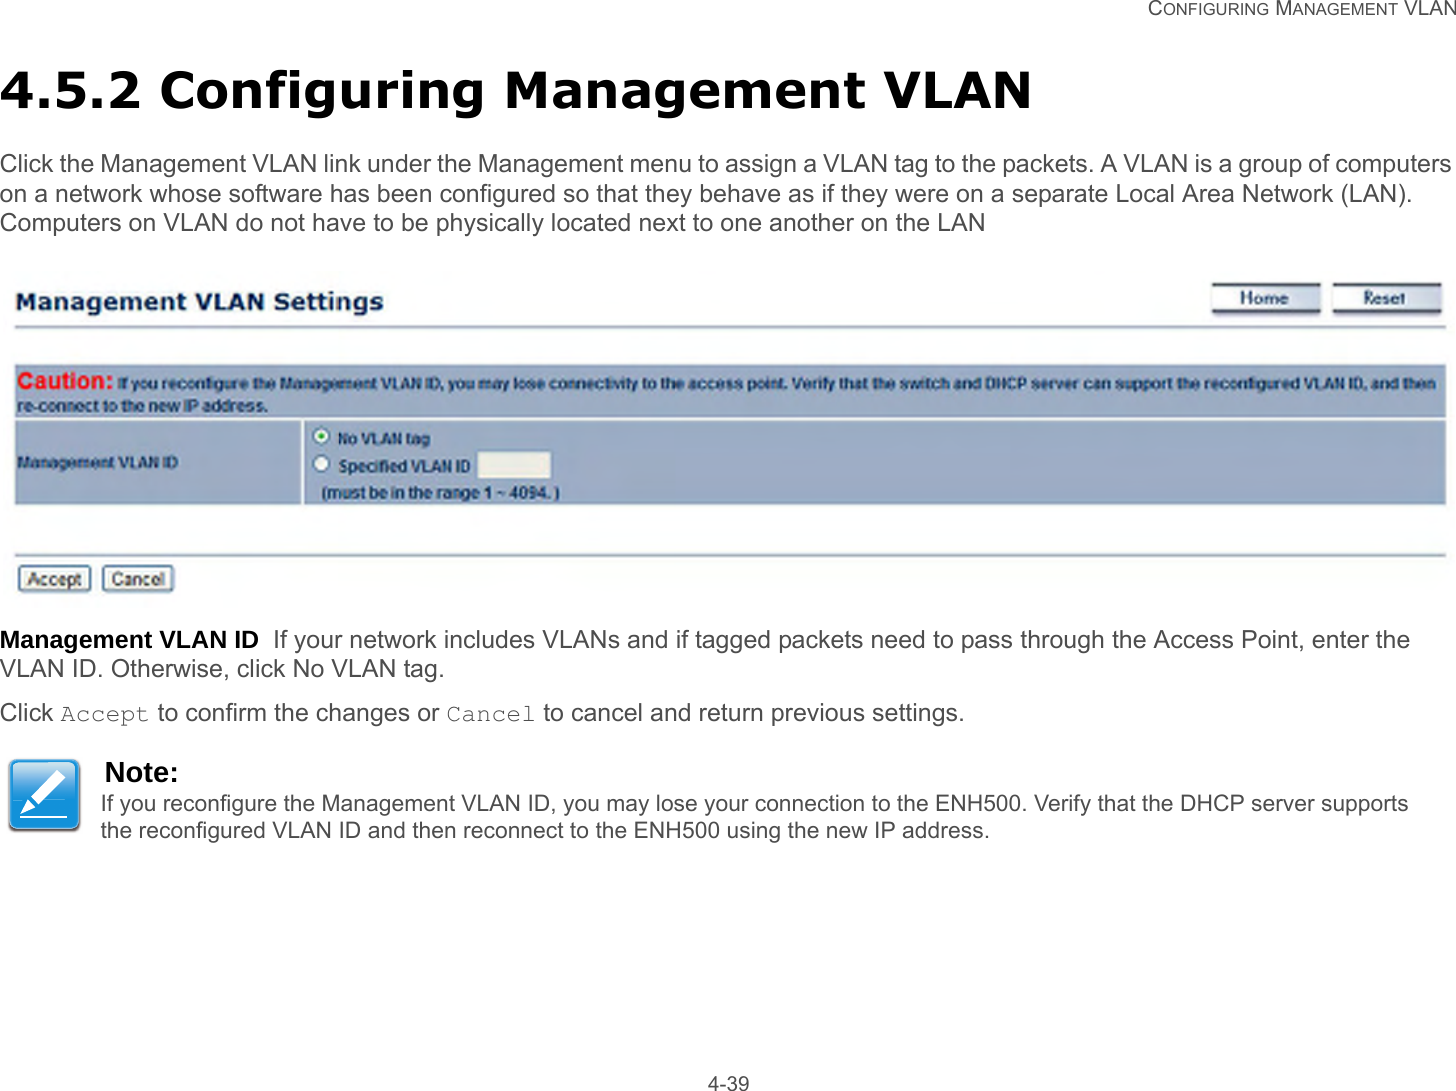   CONFIGURING MANAGEMENT VLAN 4-394.5.2 Configuring Management VLANClick the Management VLAN link under the Management menu to assign a VLAN tag to the packets. A VLAN is a group of computers on a network whose software has been configured so that they behave as if they were on a separate Local Area Network (LAN). Computers on VLAN do not have to be physically located next to one another on the LANManagement VLAN ID  If your network includes VLANs and if tagged packets need to pass through the Access Point, enter the VLAN ID. Otherwise, click No VLAN tag.Click Accept to confirm the changes or Cancel to cancel and return previous settings.Note:If you reconfigure the Management VLAN ID, you may lose your connection to the ENH500. Verify that the DHCP server supports the reconfigured VLAN ID and then reconnect to the ENH500 using the new IP address.